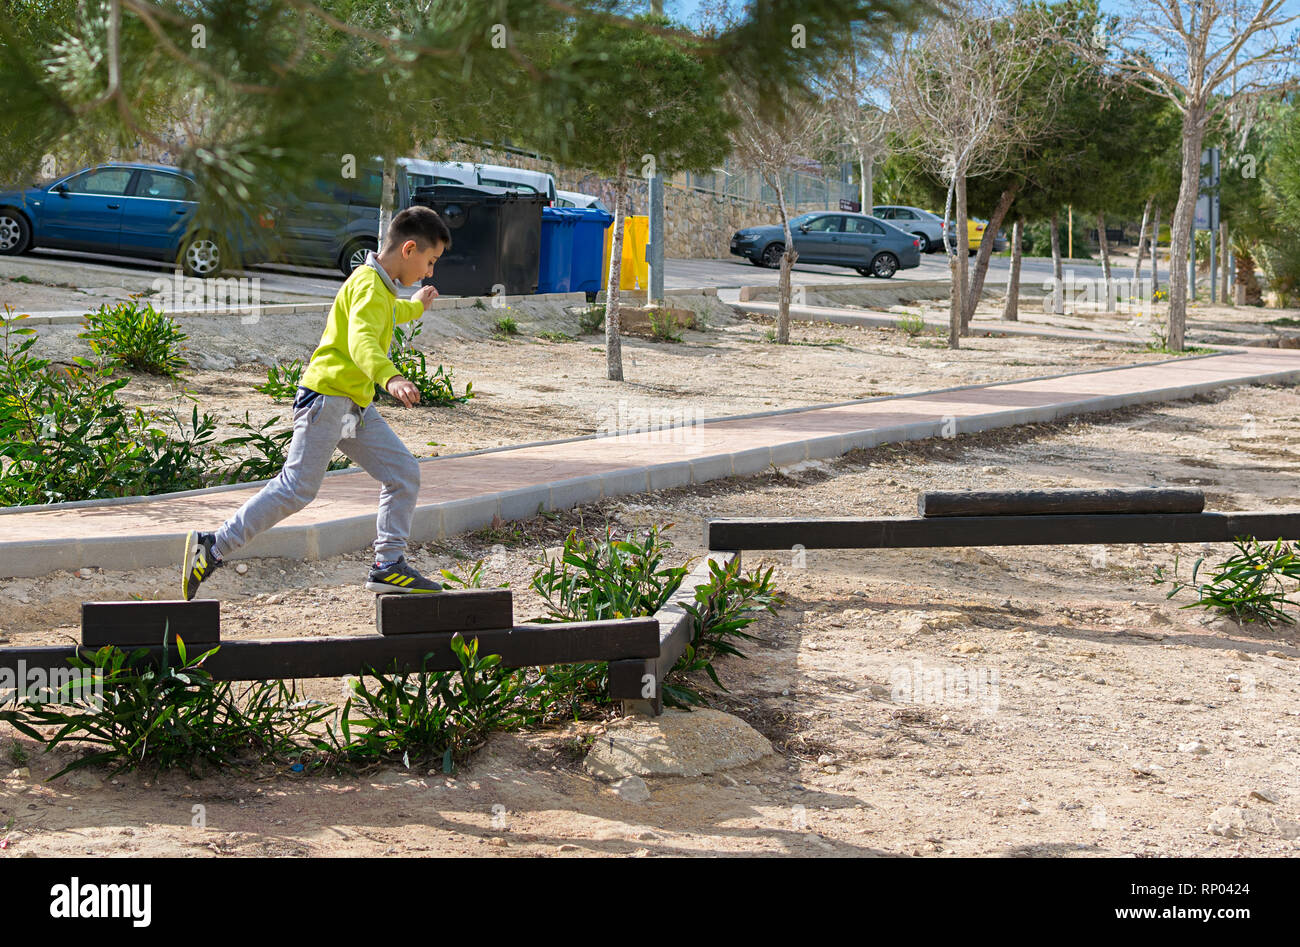 MURCIA / SPAIN - FEBRUARY 10 -2019: Little boy walking on a log in the park. child on the balance beam Stock Photo